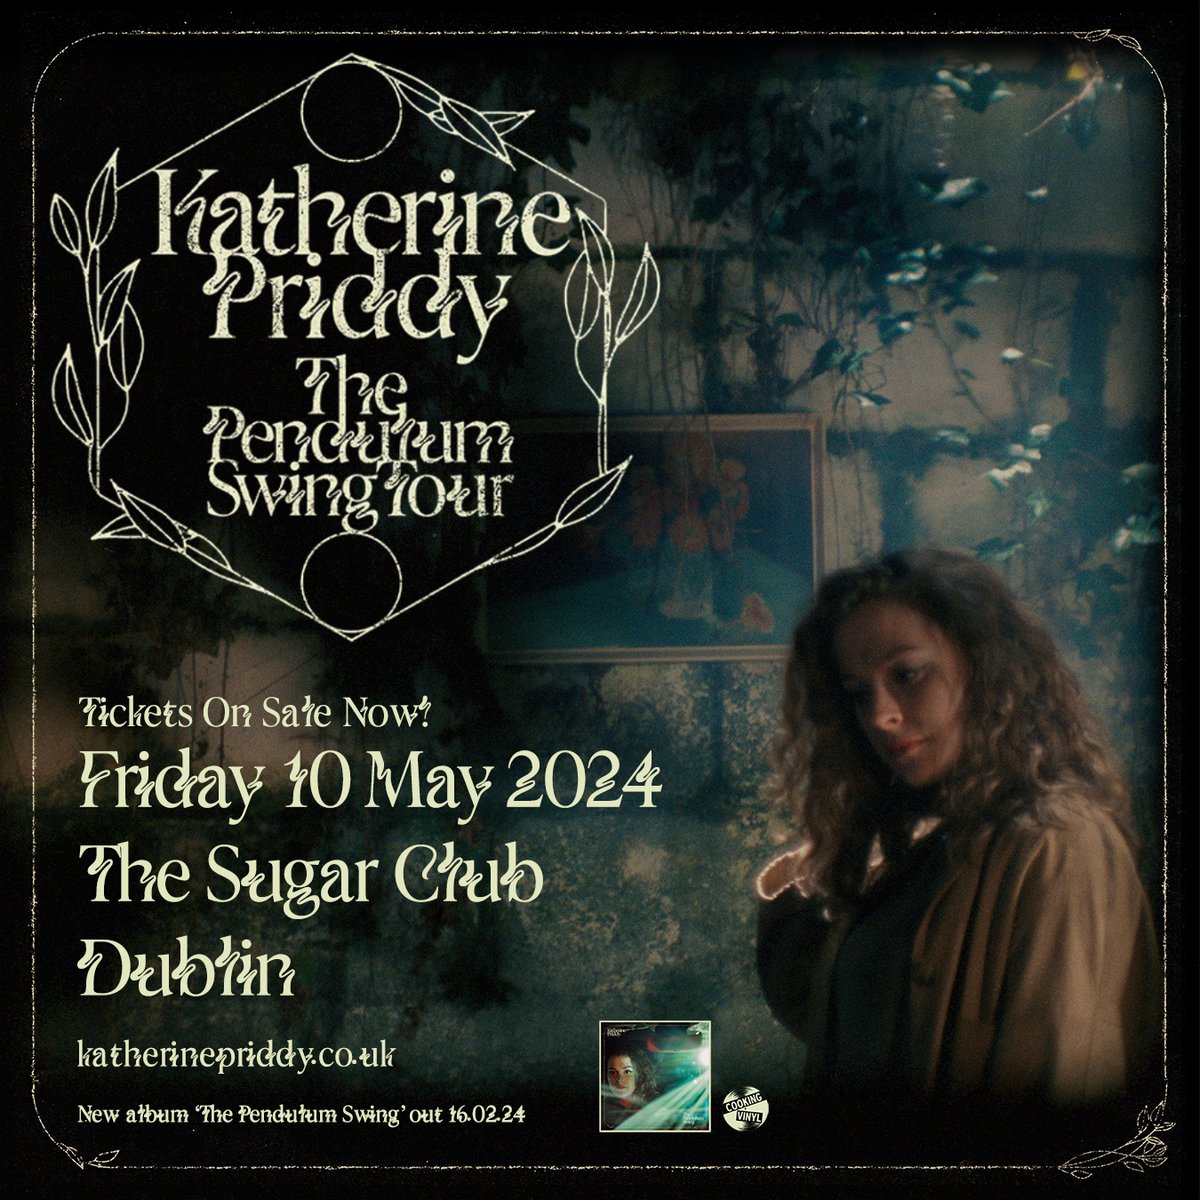 🎶 𝗧𝗢𝗠𝗢𝗥𝗥𝗢𝗪 𝗡𝗜𝗚𝗛𝗧 🎶 Becoming one of the most exciting names on the British music scene, @KatherinePriddy makes her debut in @sugarclubdublin tomorrow night 😍 🎫 Buy tickets ~ bit.ly/47egGKi